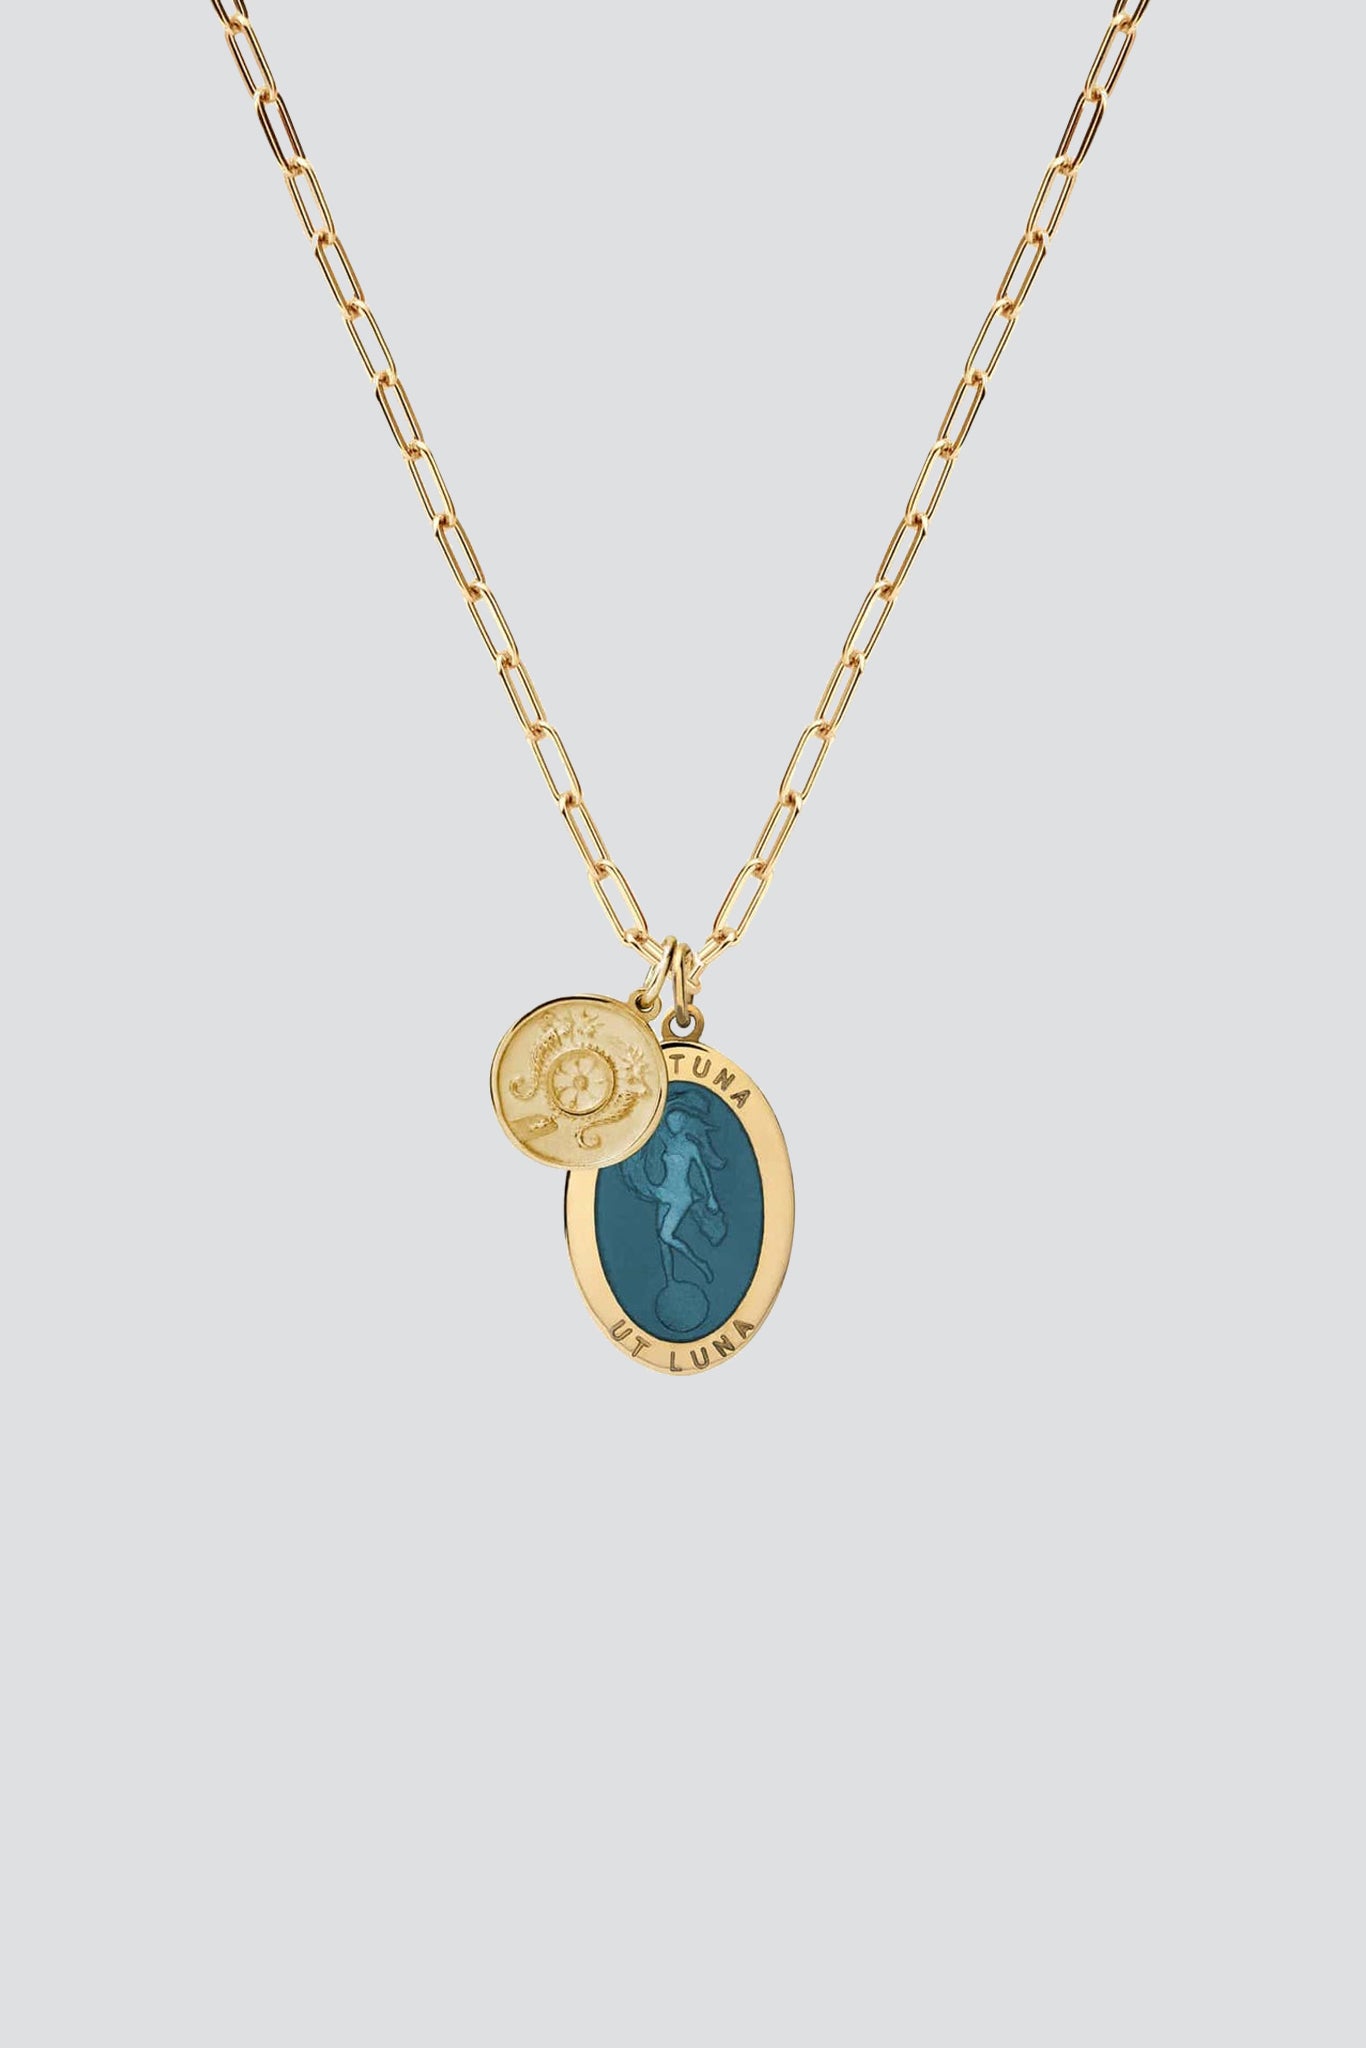 Cable Chain Gold/Teal Fortuna Necklace